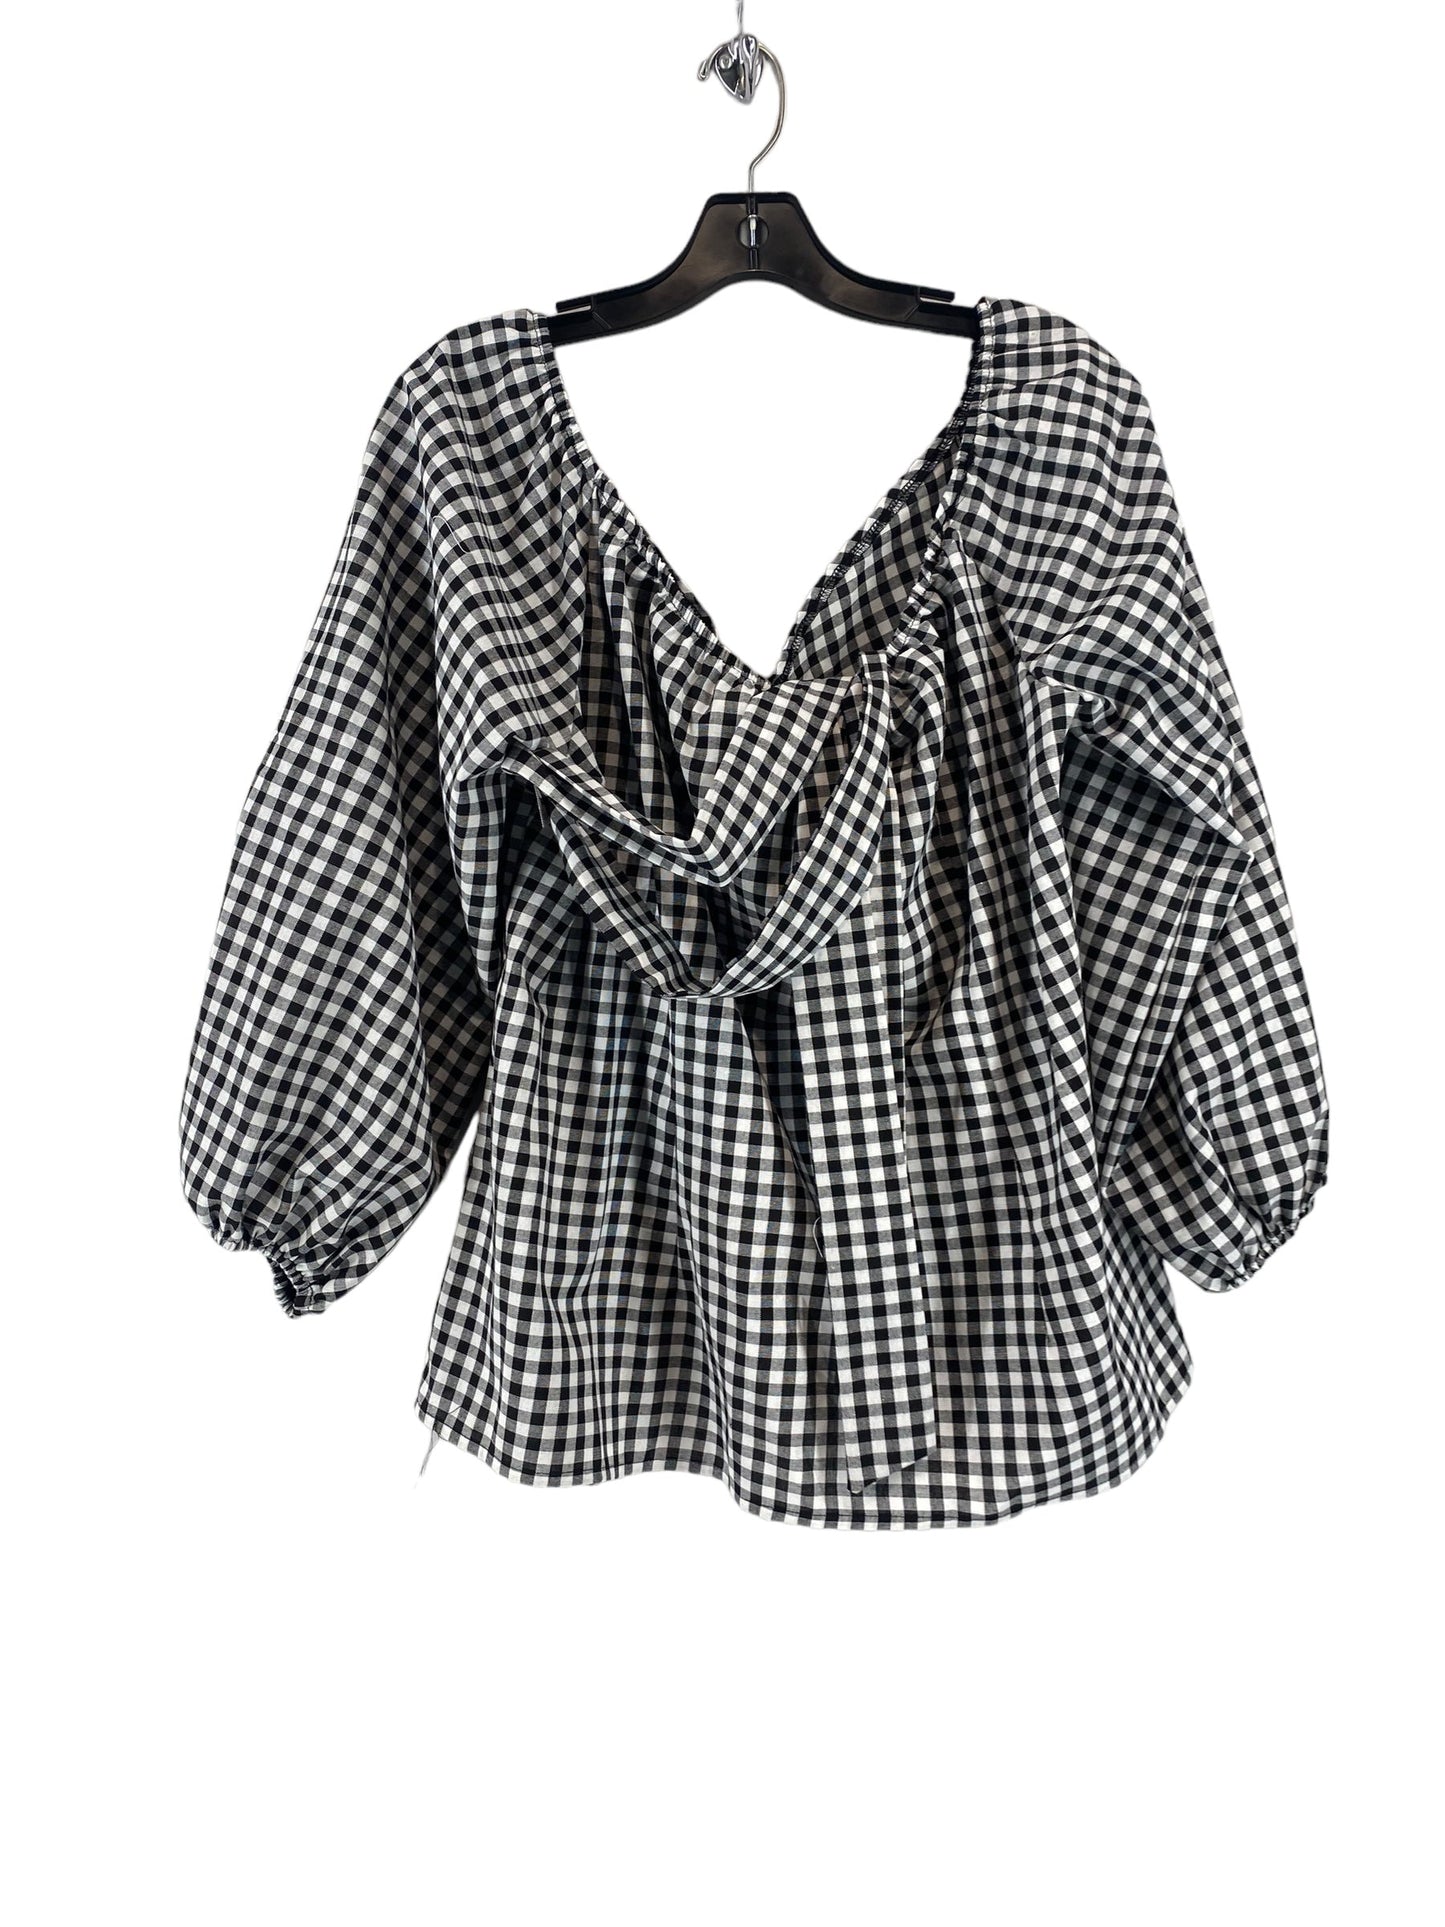 Blouse 3/4 Sleeve By Shein  Size: 2x